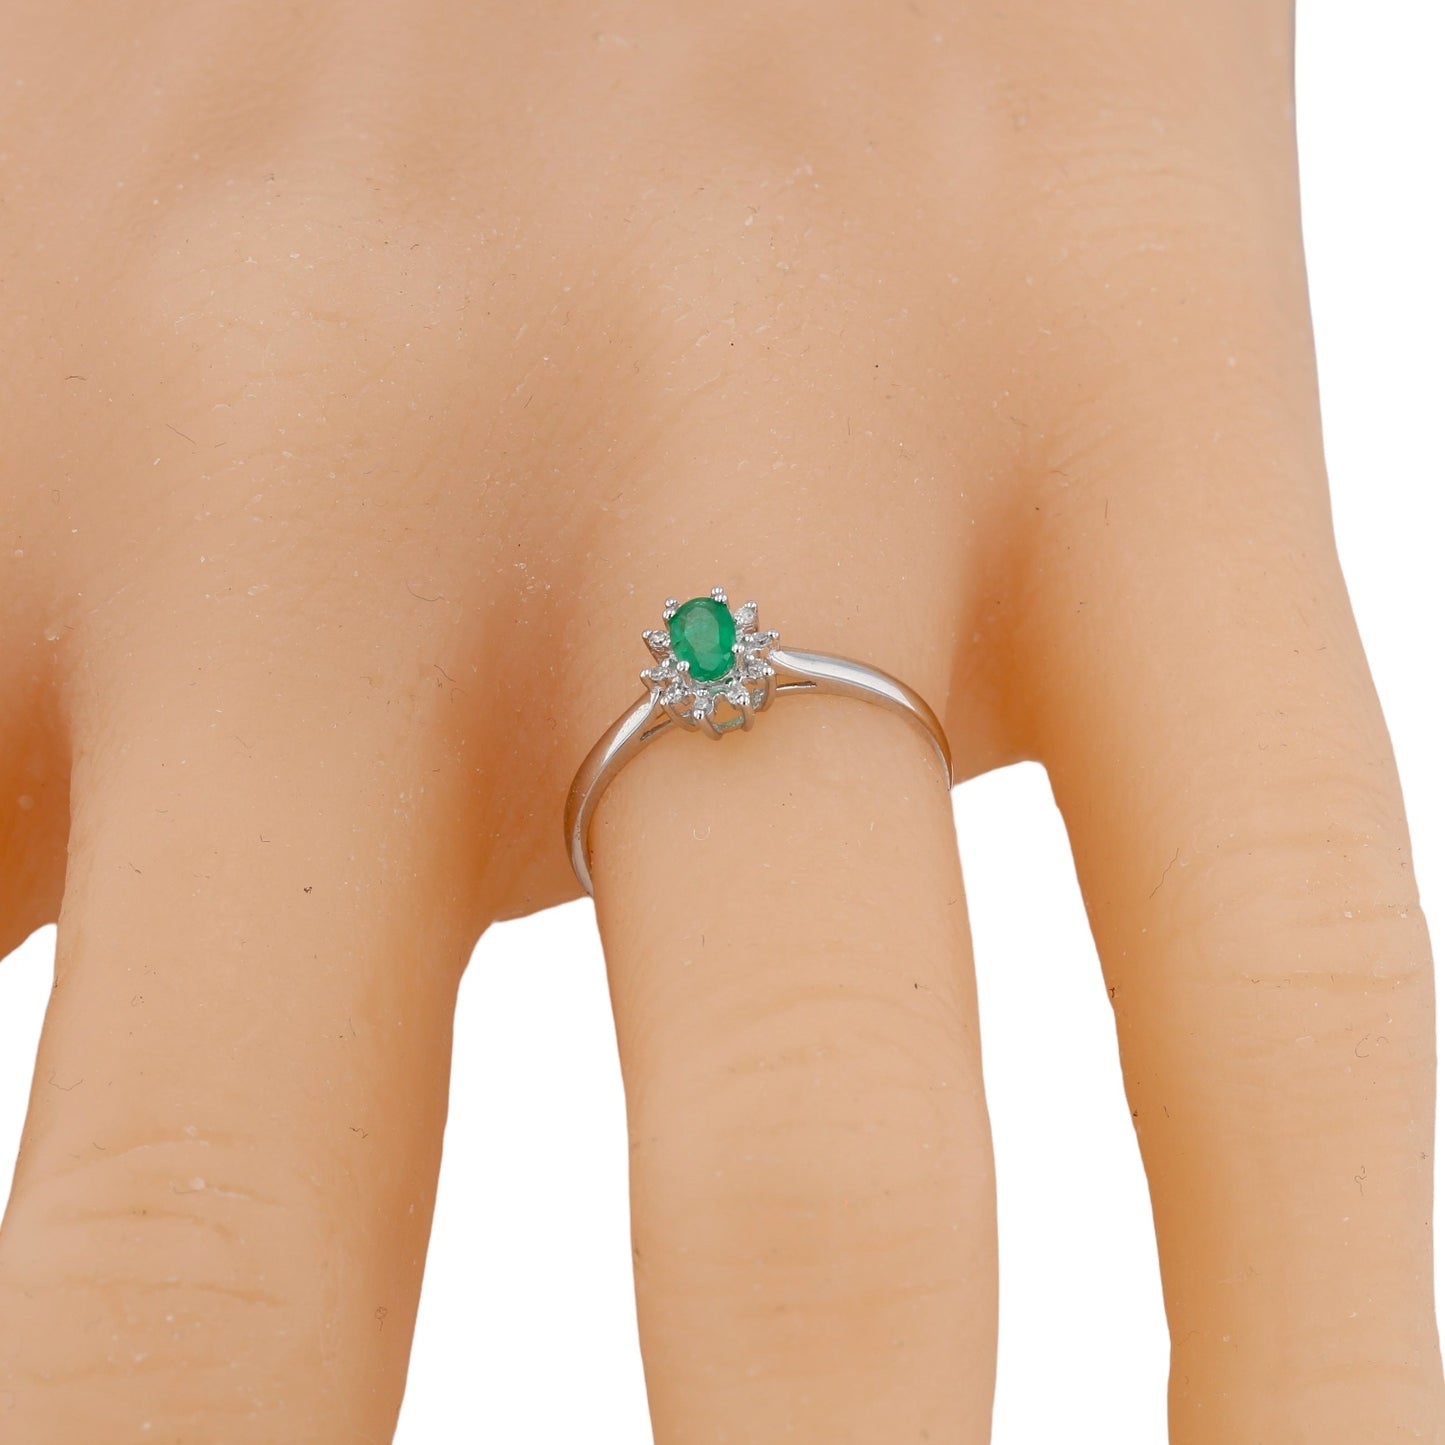 14K white gold emerald and diamonds halo oval solitary ring-19470